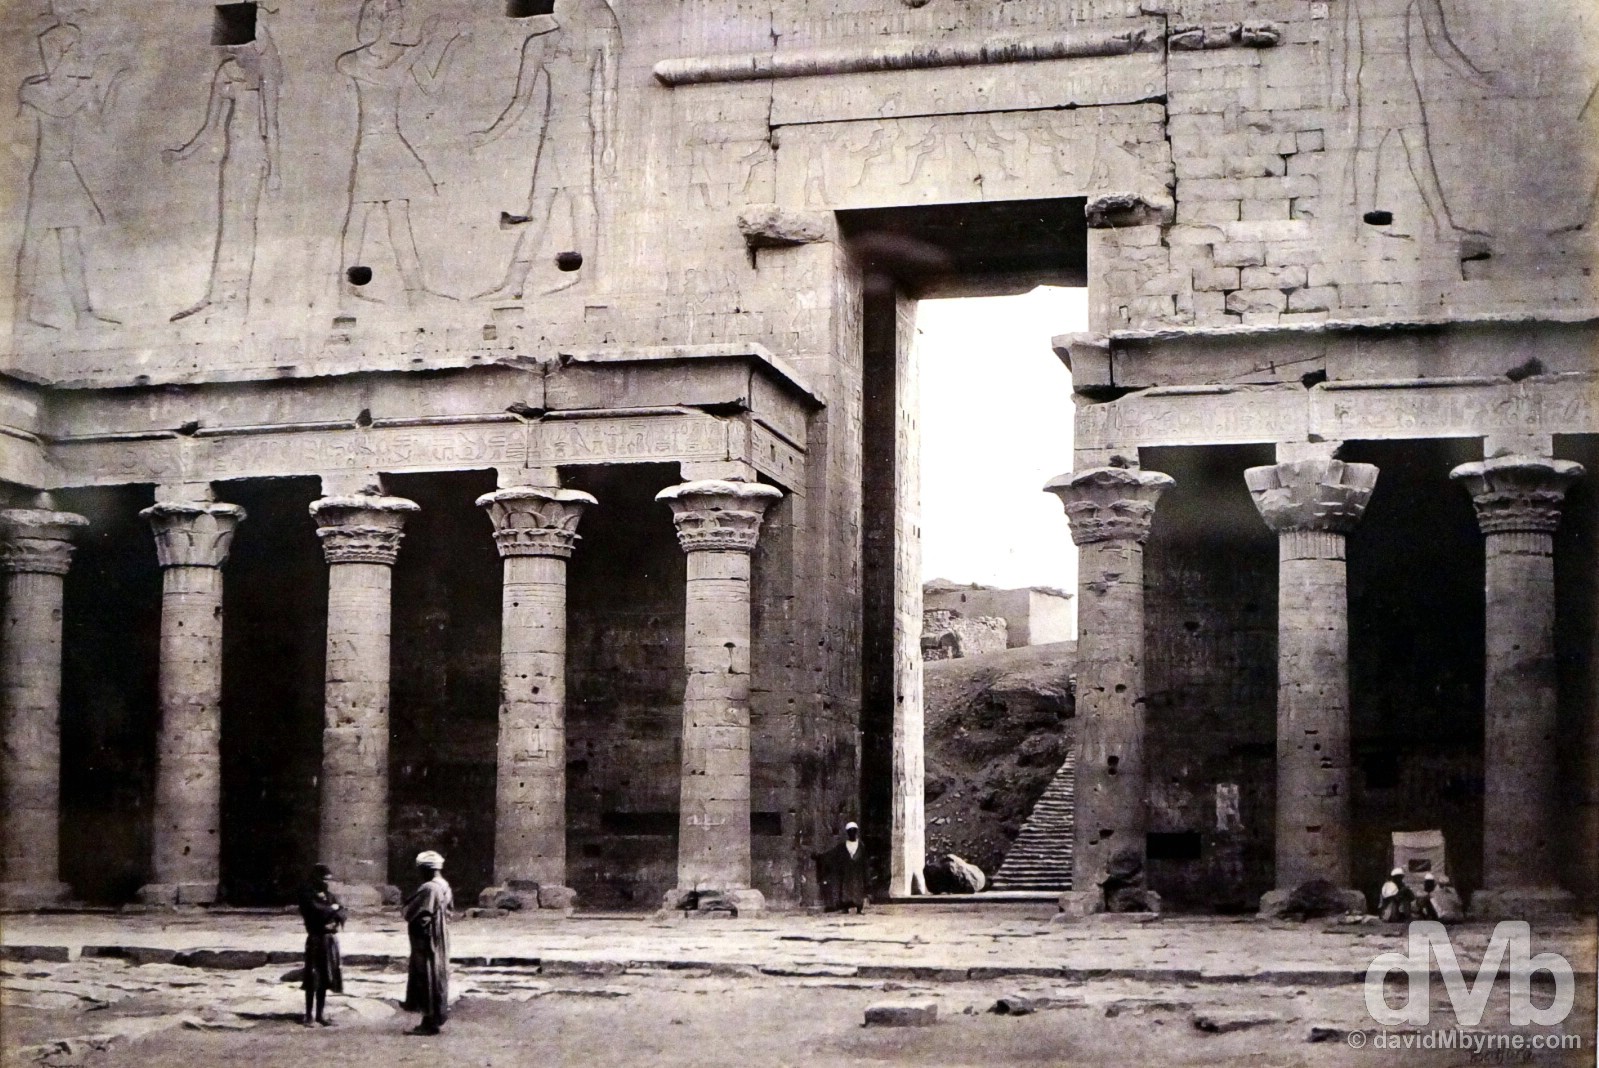 A Francis Bedford (1815-1894) capture of the Great Court of the Temple of Horus in Edfu, Egypt. Captured on March 14, 1862, & on display as part of the Cairo to Constantinople Exhibit in the Queen's Gallery of Buckingham Palace, London, England. December 14, 2014.